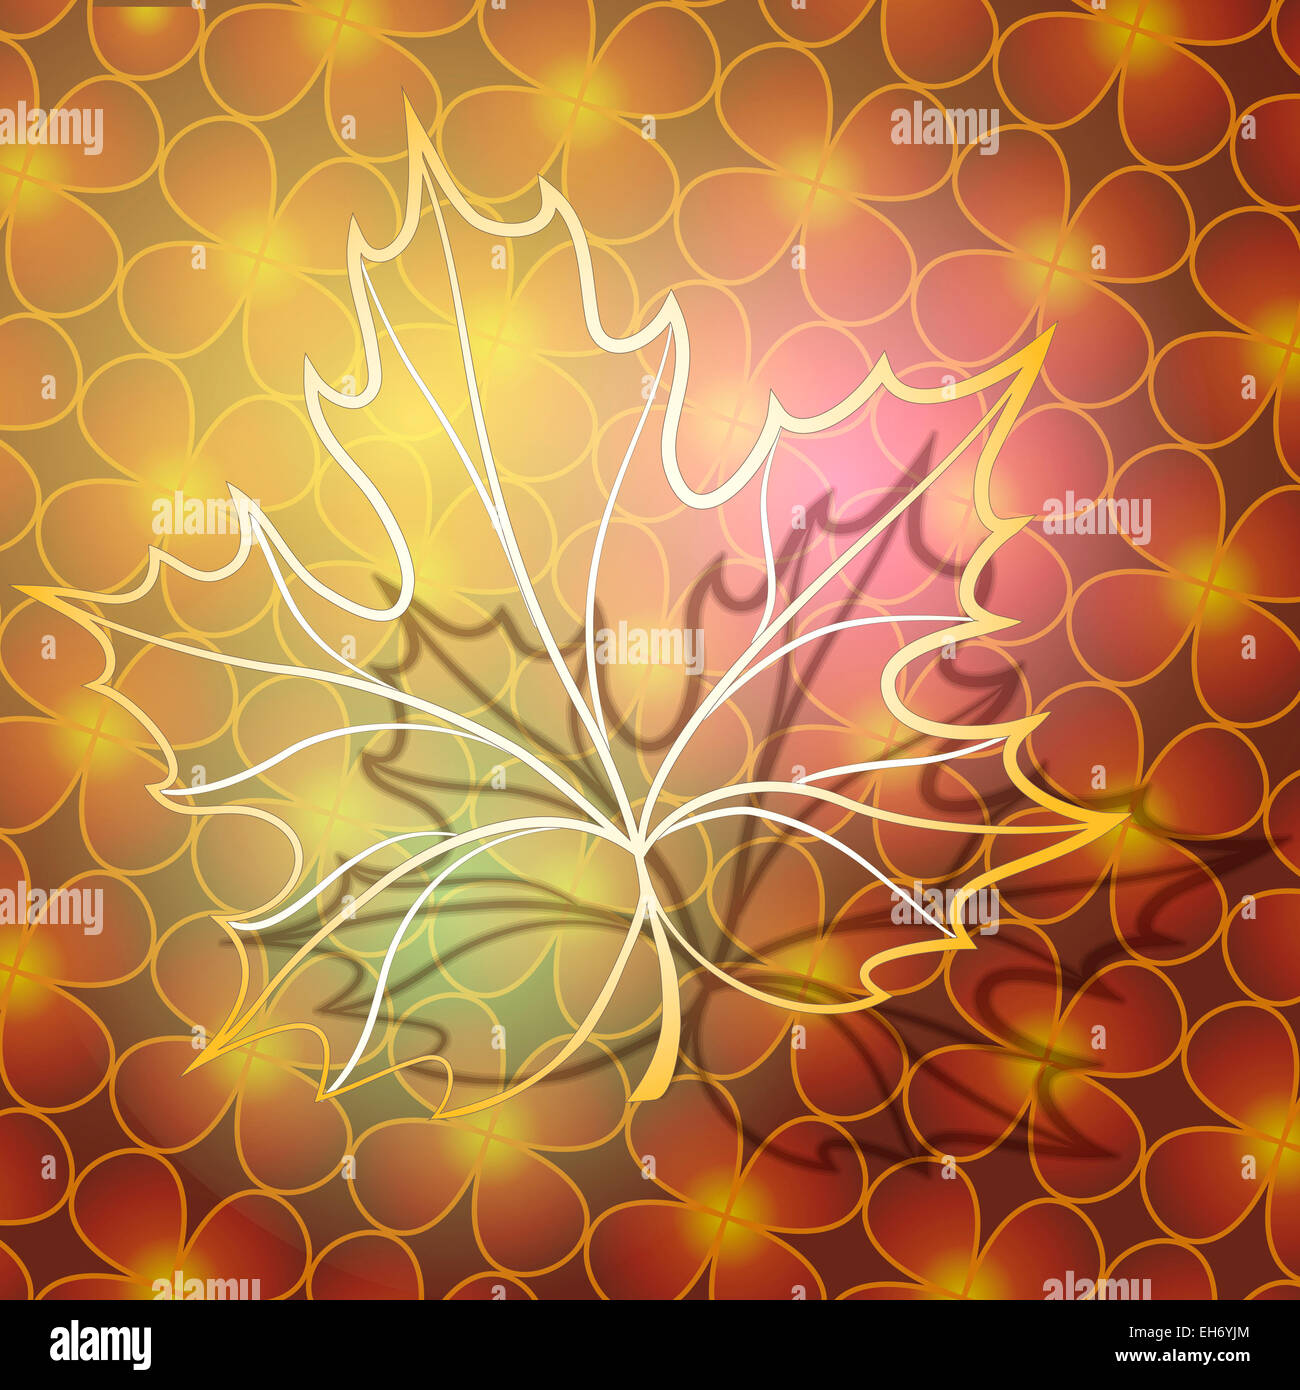 Abstract illustration of maple leaf made of gold against floral background Stock Photo